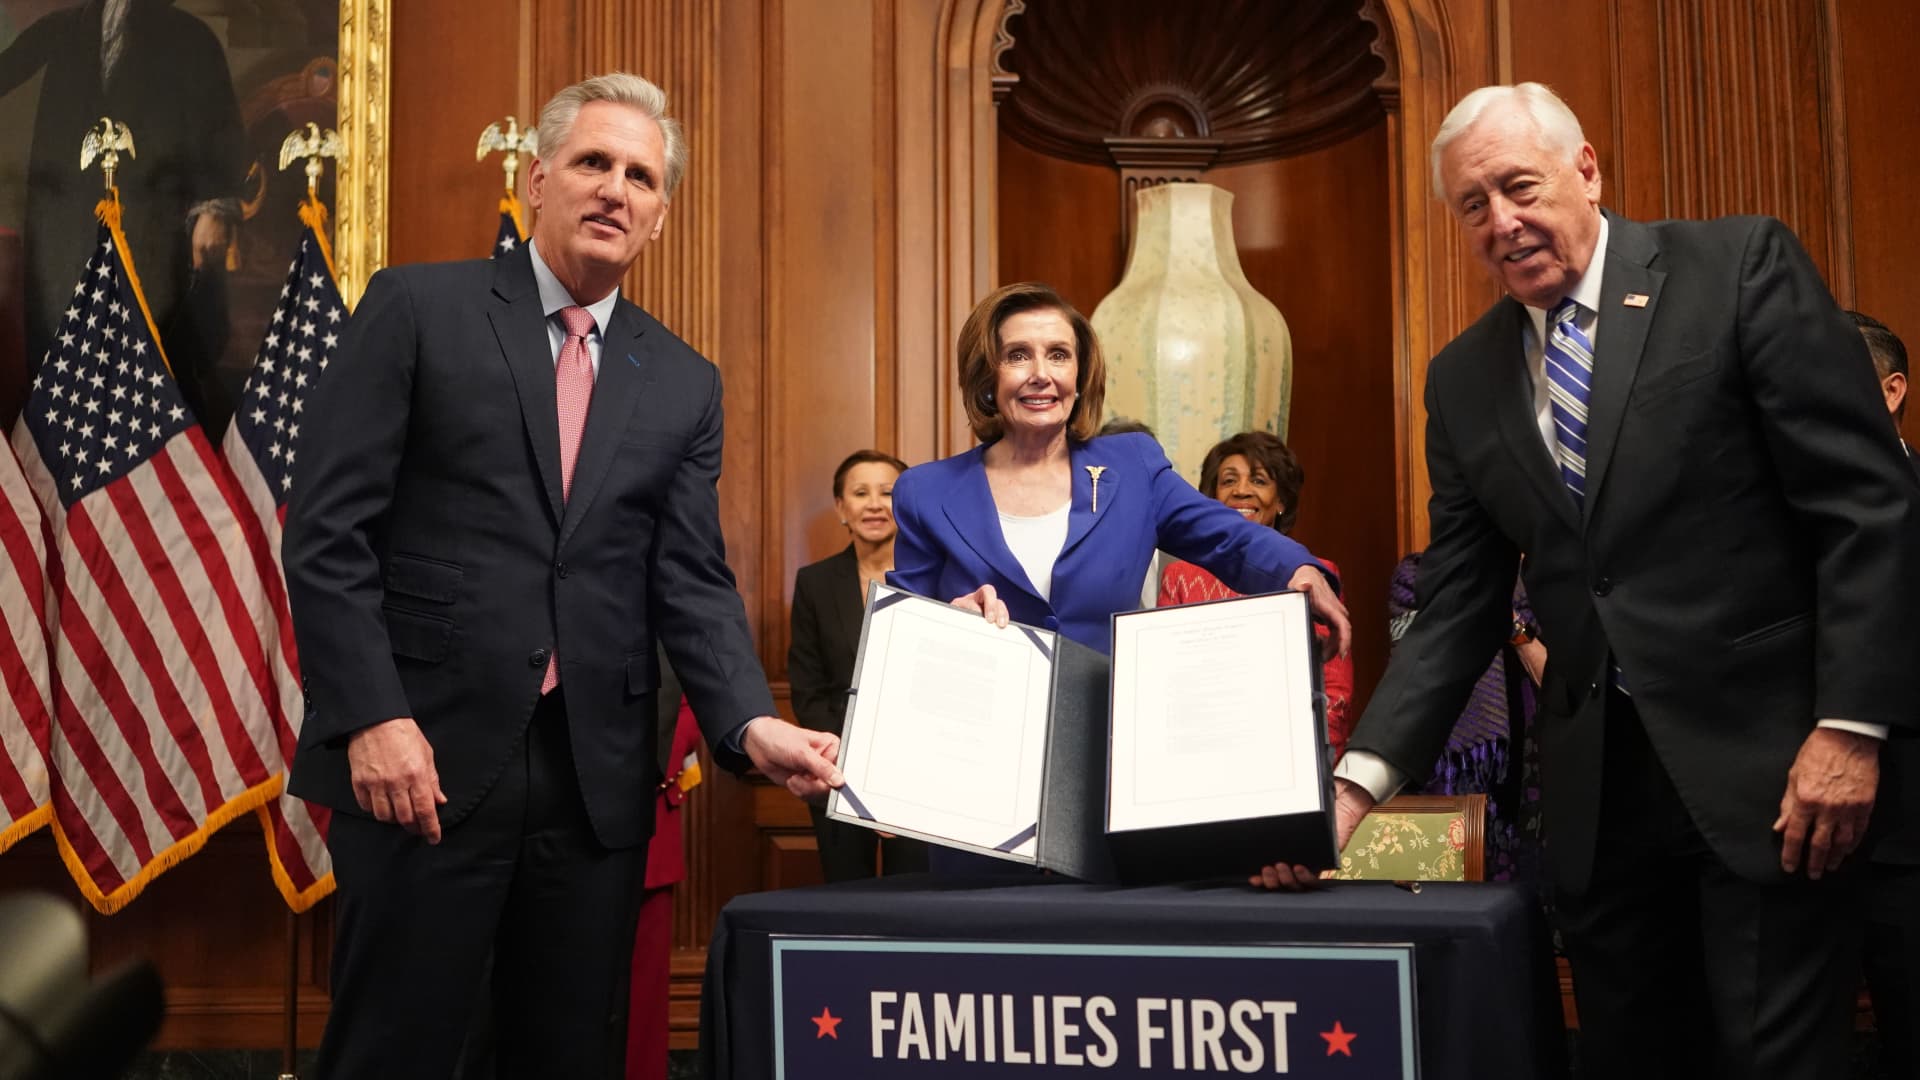 U.S. Speaker of the House Nancy Pelosi, center, and Reps. Kevin McCarthy, left, and Steny Hoyer show the $2 trillion stimulus bill passed by the House at a news conference in the U.S. Capitol in Washington, March 27, 2020.